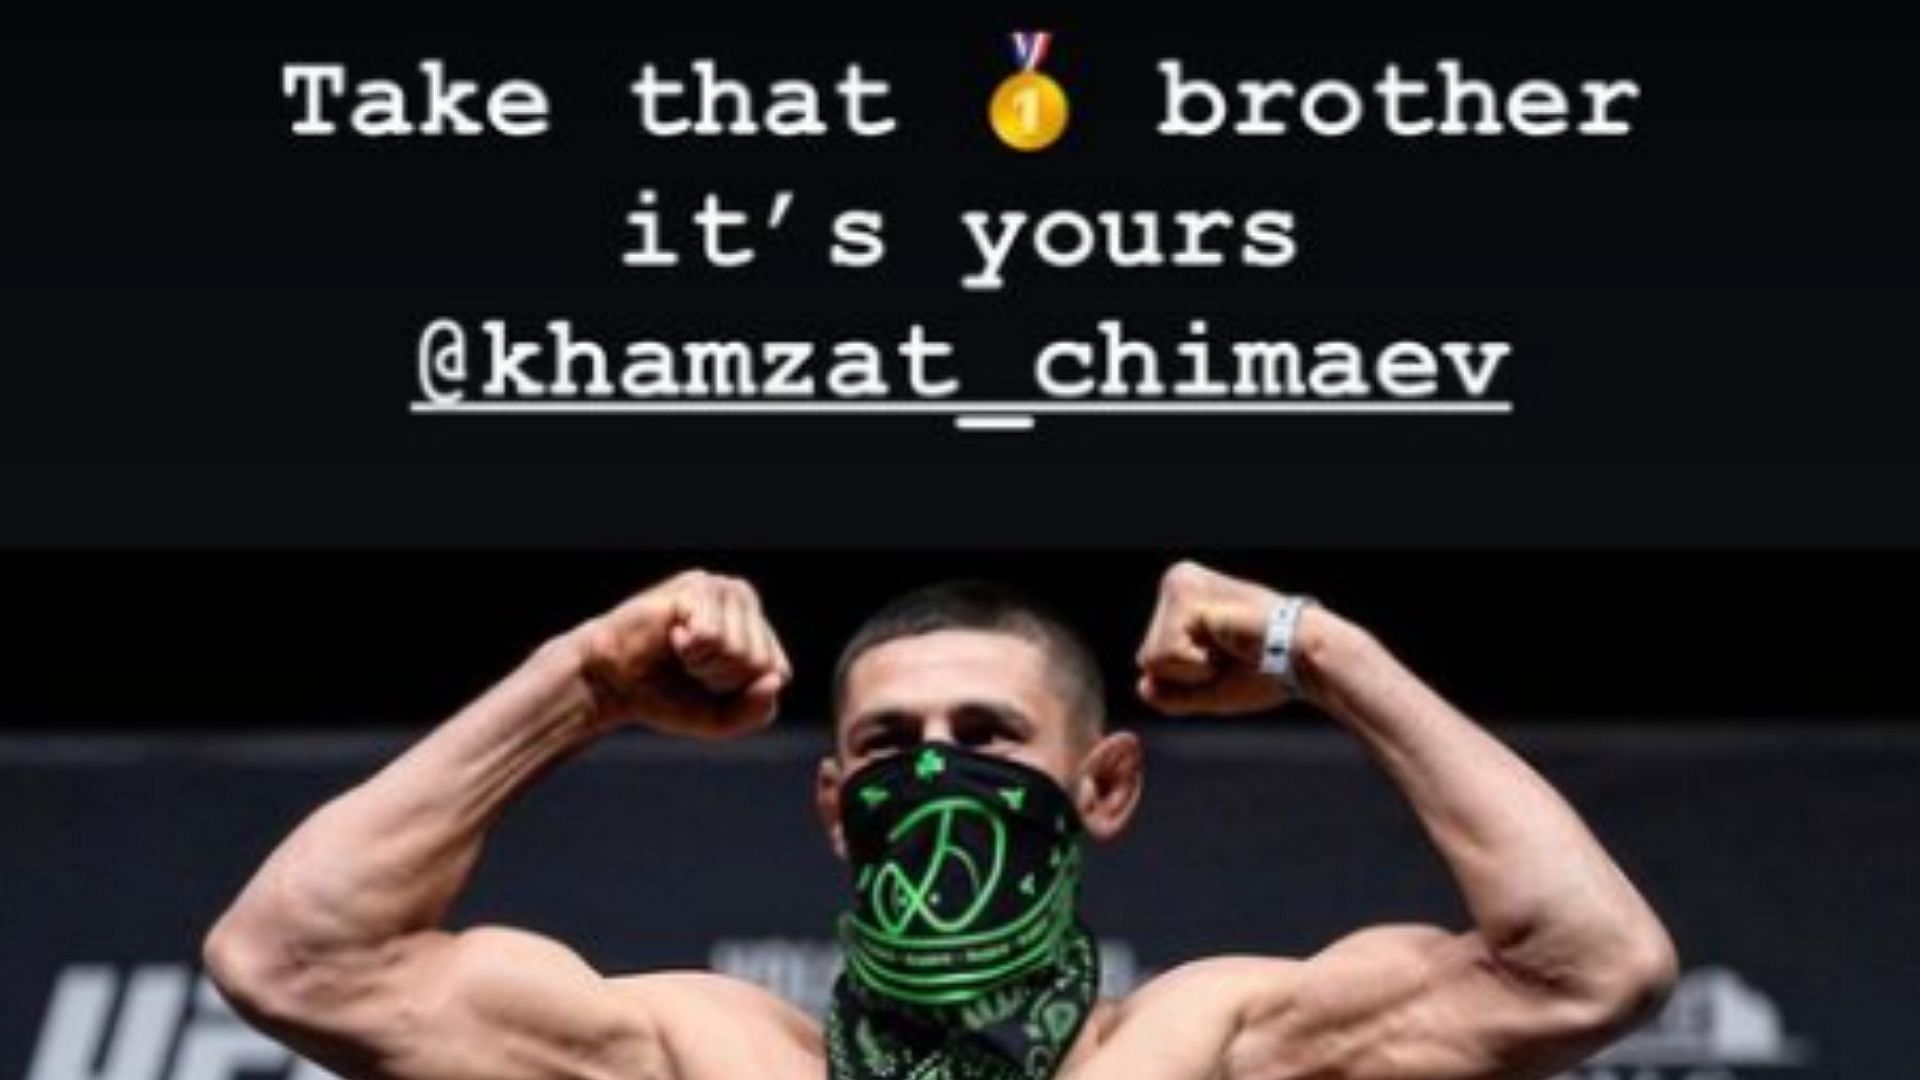 Alexander Gustafsson recently took to social media to hype up Khamzat Chimaev ahead of UFC 273
